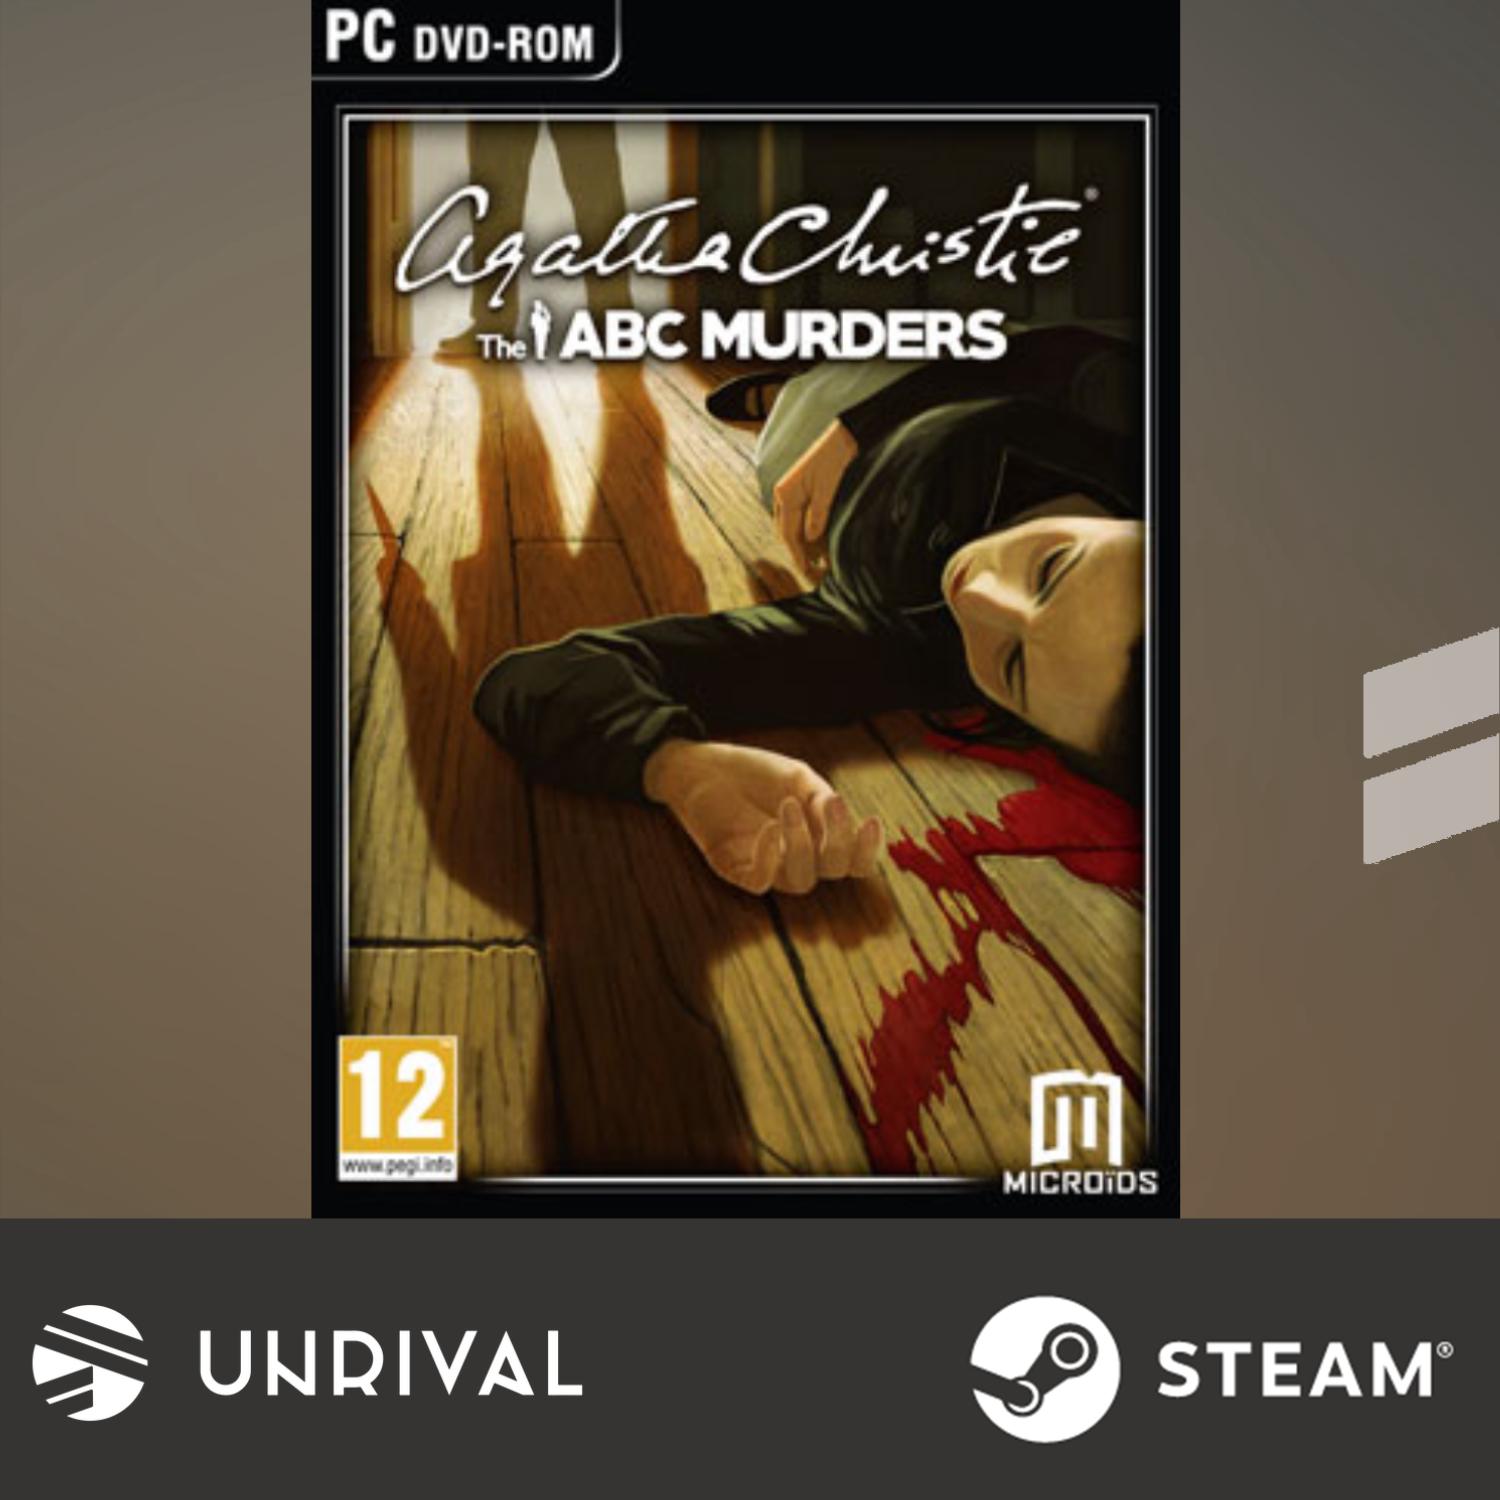 [Hot Sale] Agatha Christie - The ABC Murders PC Digital Download Game (Single Player) - Unrival